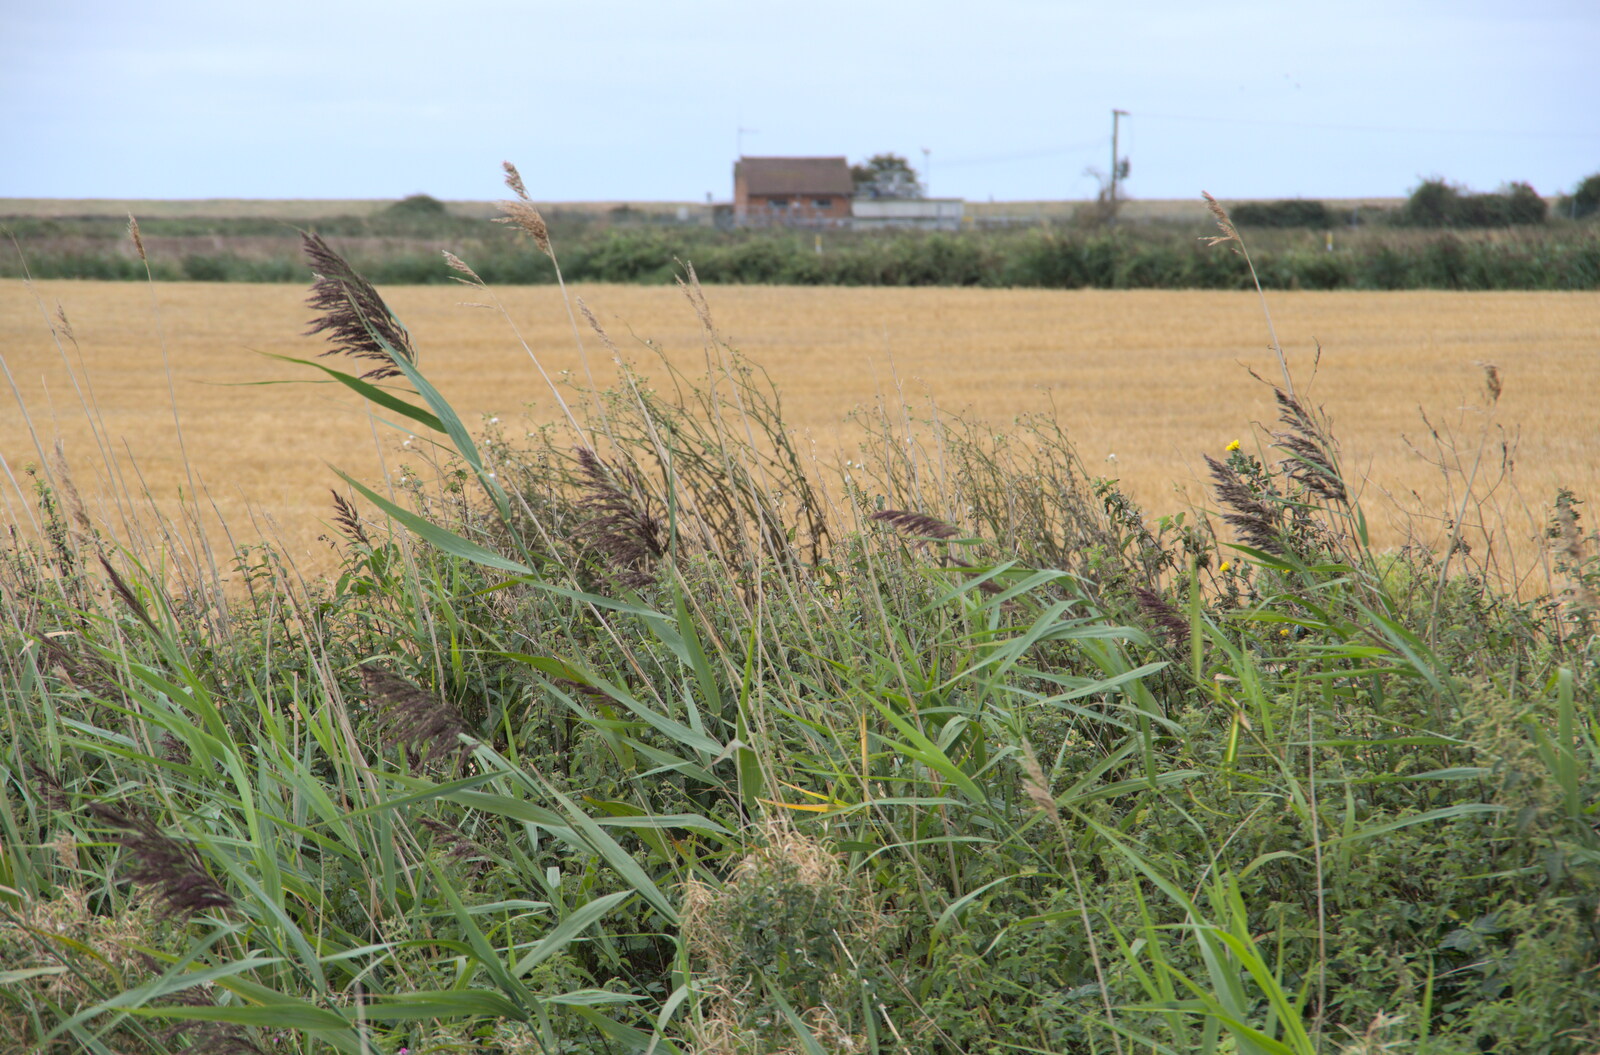 Wind-blown grasses from A Trip to Orford, Suffolk - 29th August 2020